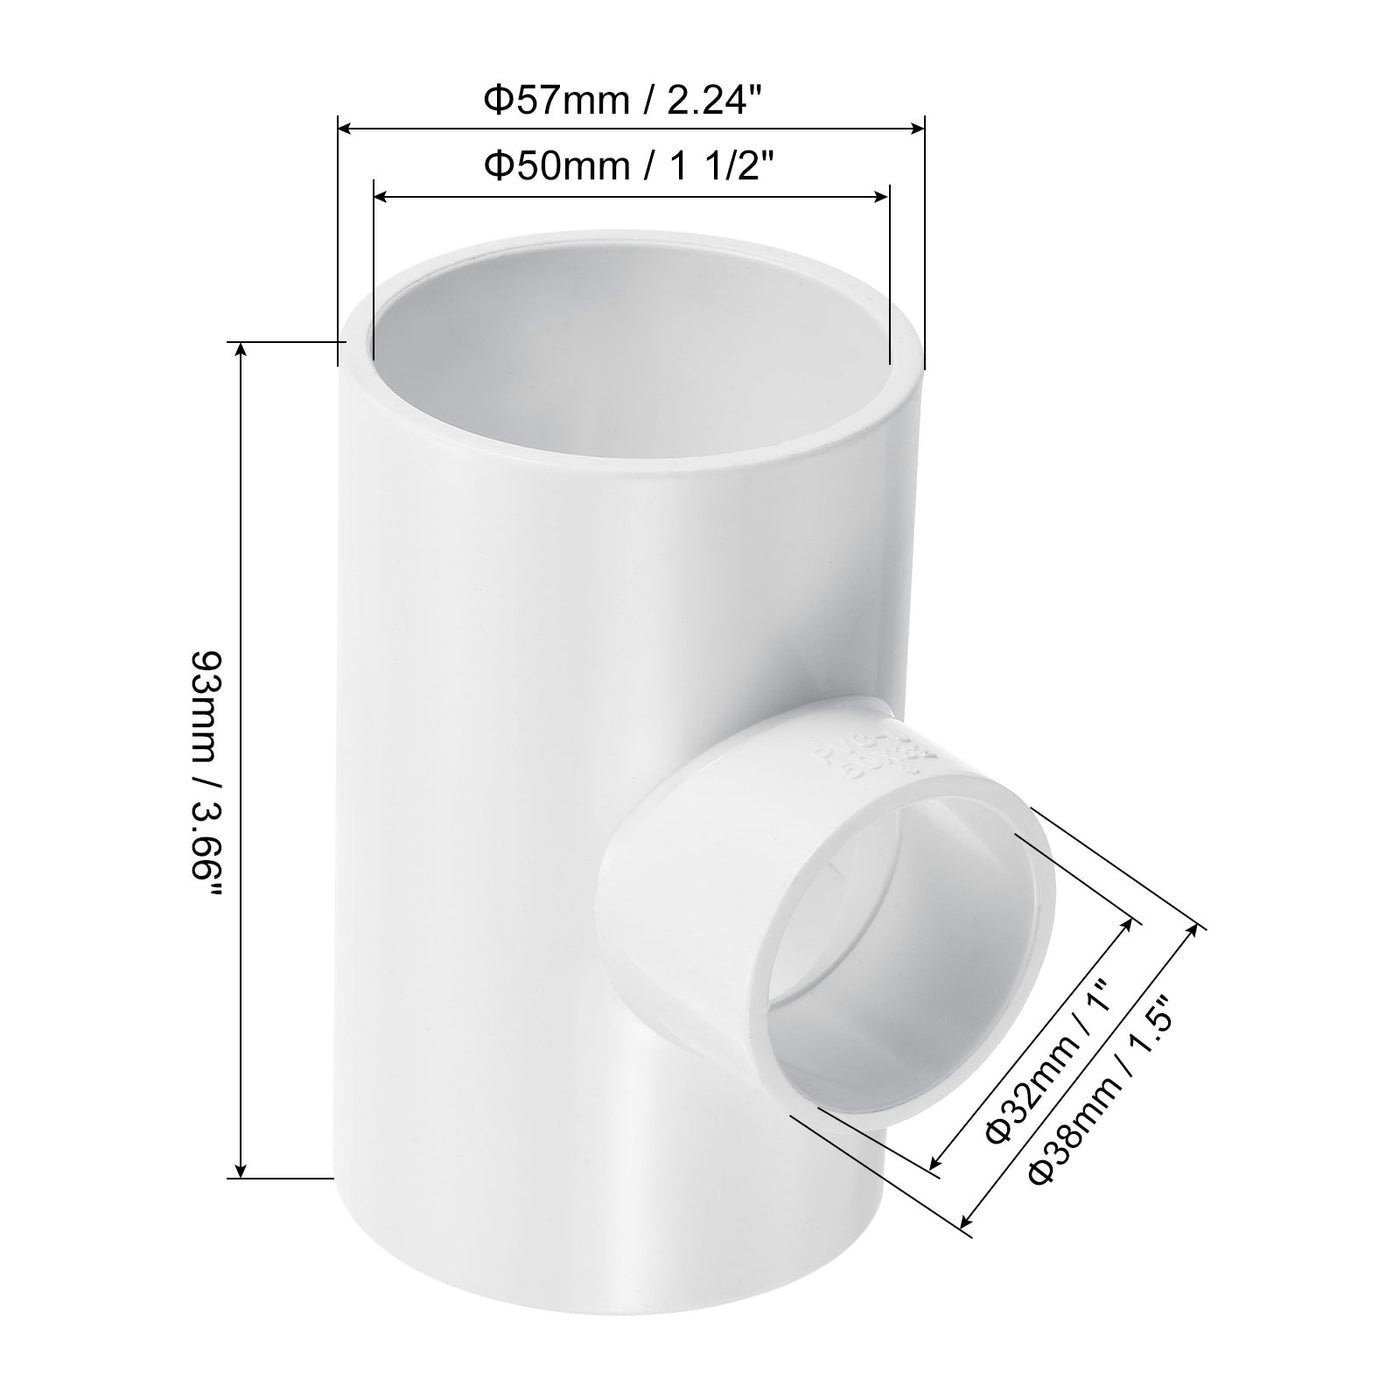 Harfington 1 1/2" x 1" 3 Way Tee Pipe Fittings UPVC, 2 Pack Joint Coupling Pipe, White